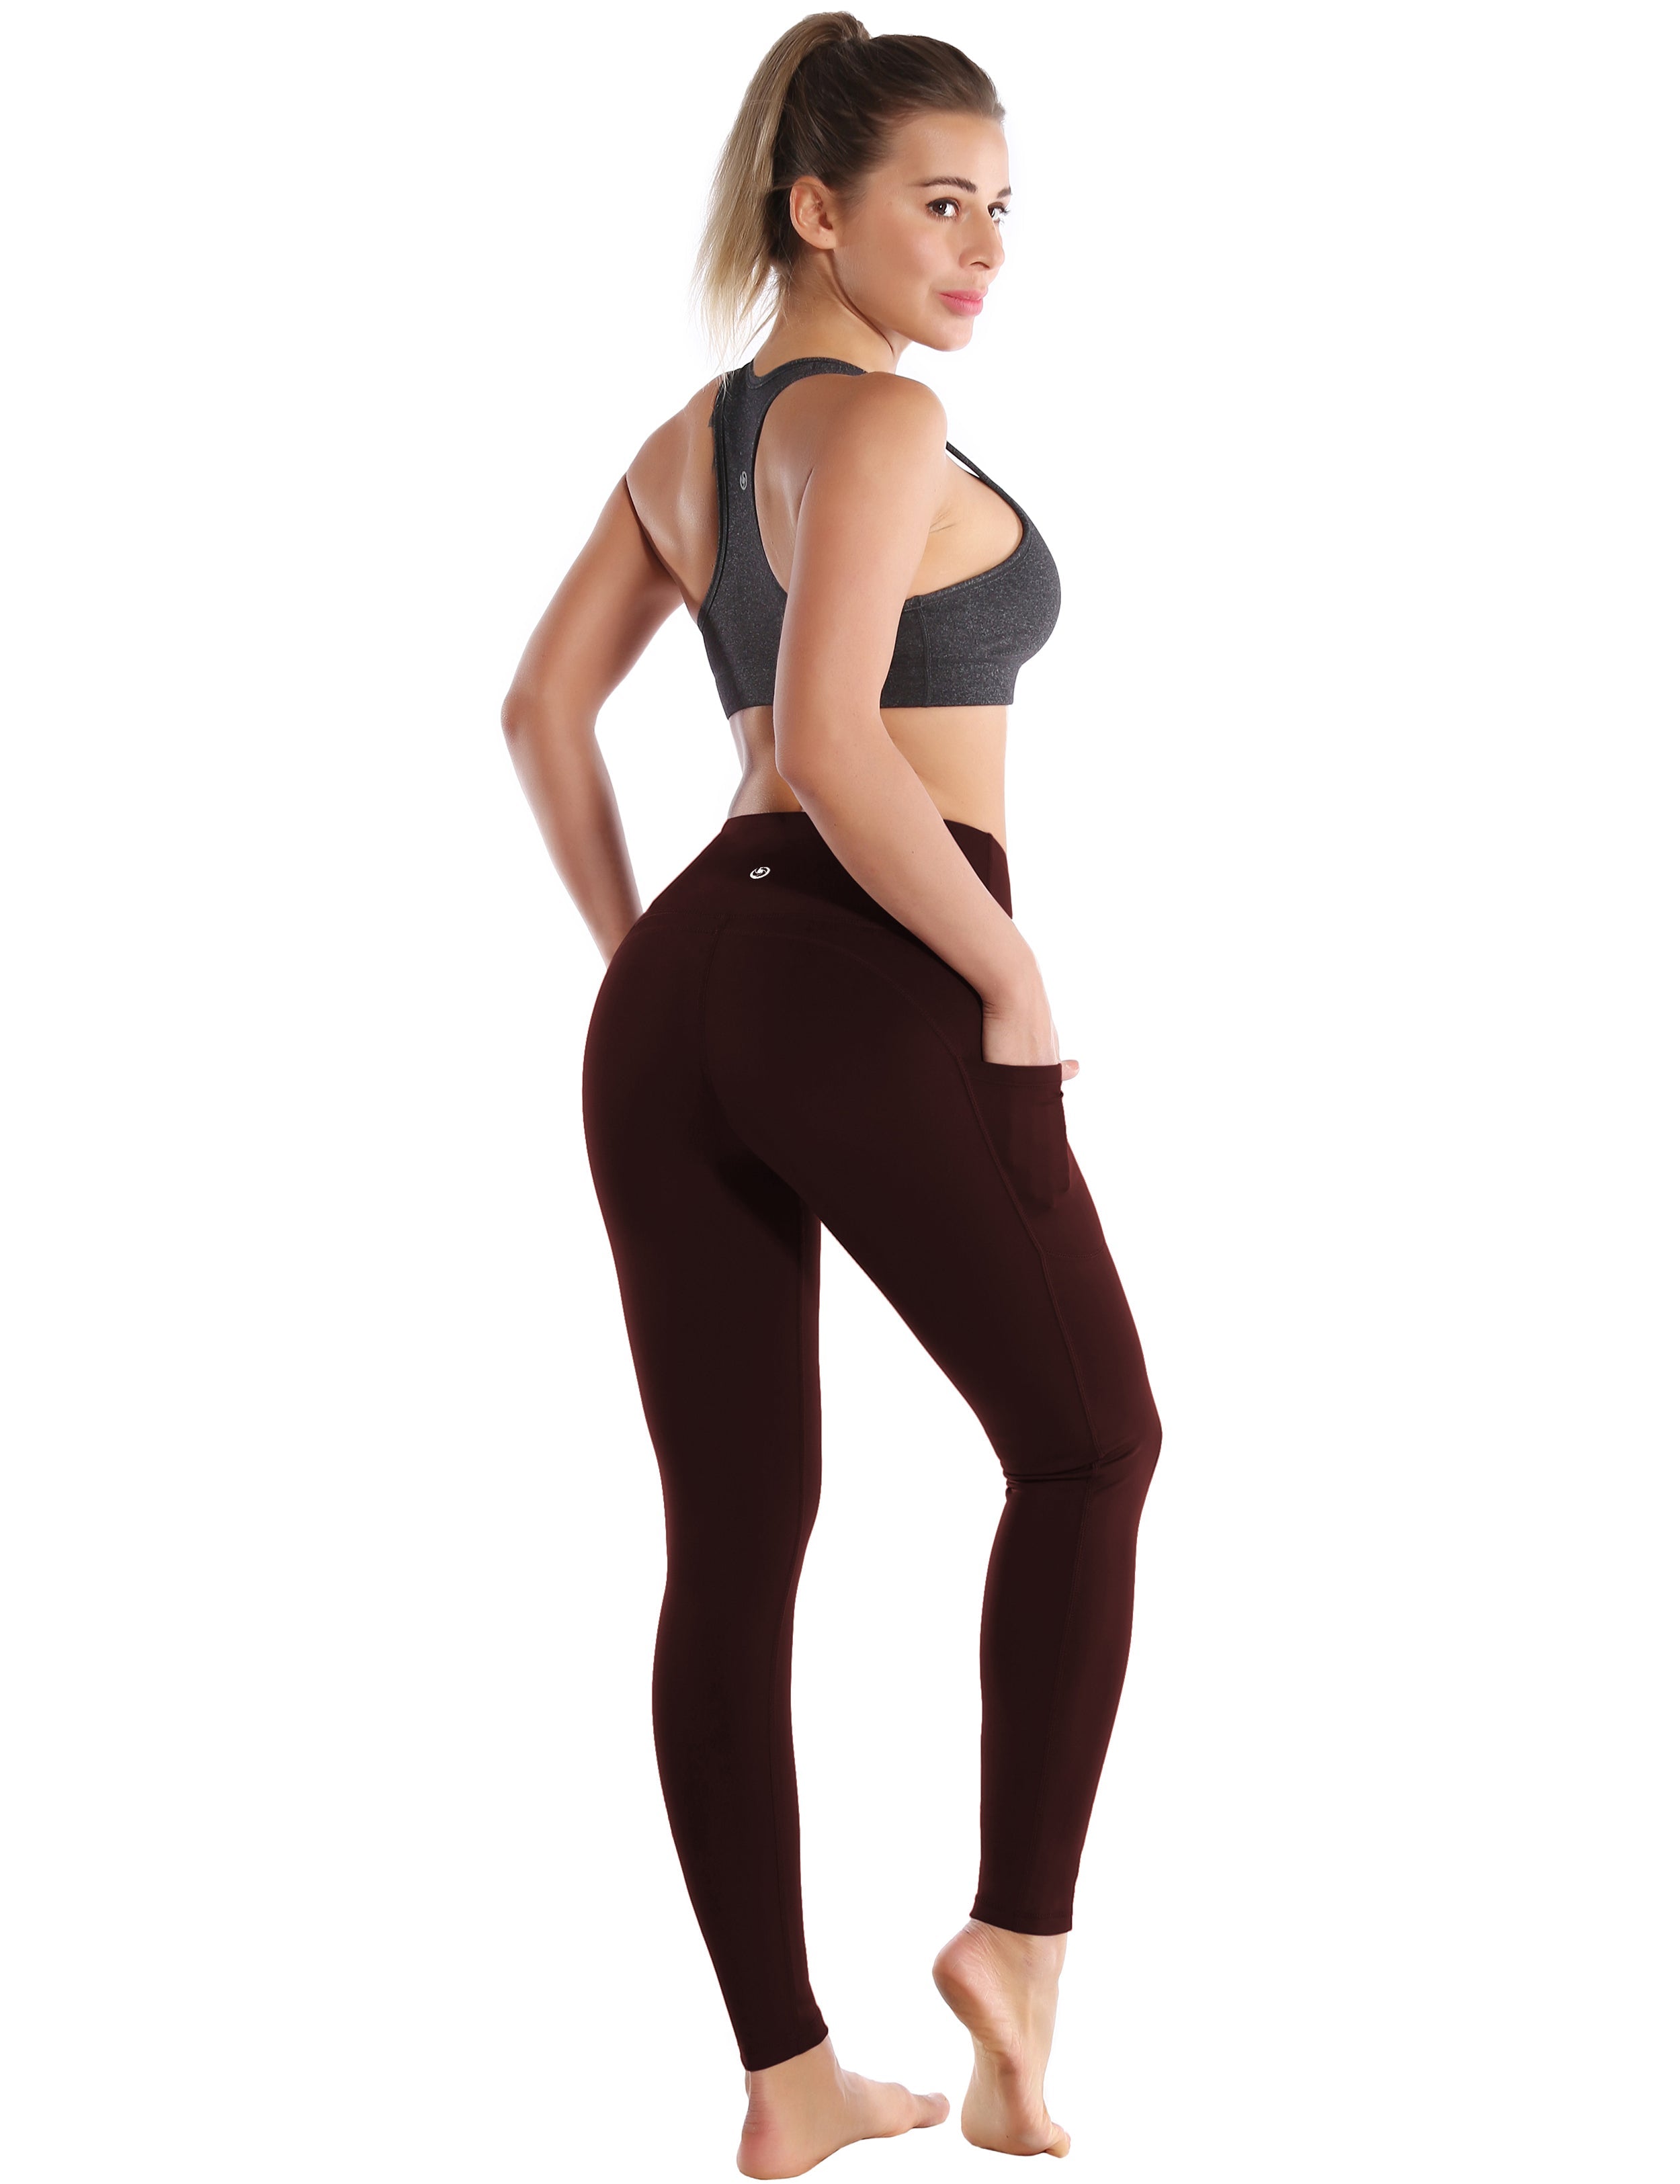 Hip Line Side Pockets Golf Pants mahoganymaroon Sexy Hip Line Side Pockets 75%Nylon/25%Spandex Fabric doesn't attract lint easily 4-way stretch No see-through Moisture-wicking Tummy control Inner pocket Two lengths